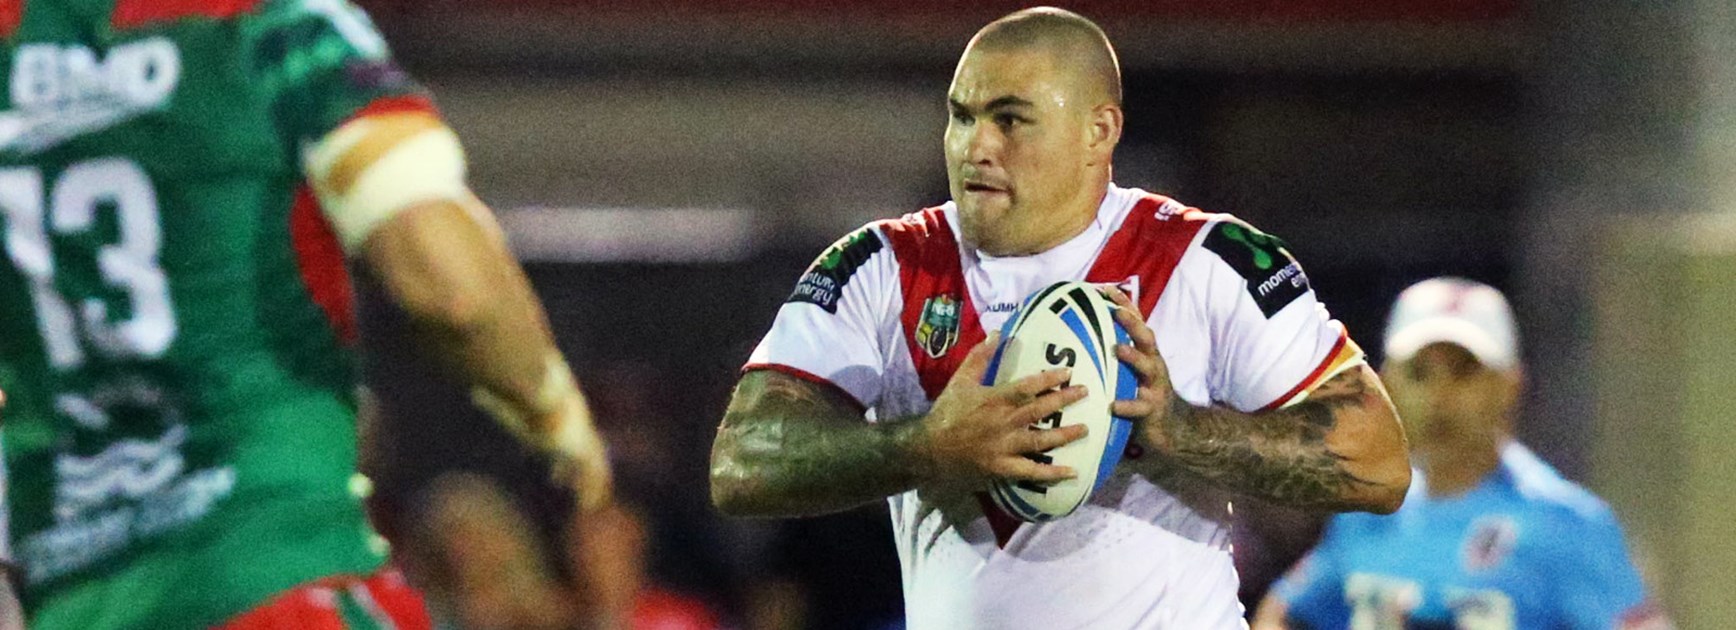 Russell Packer rebuilt his NRL career at the Dragons.